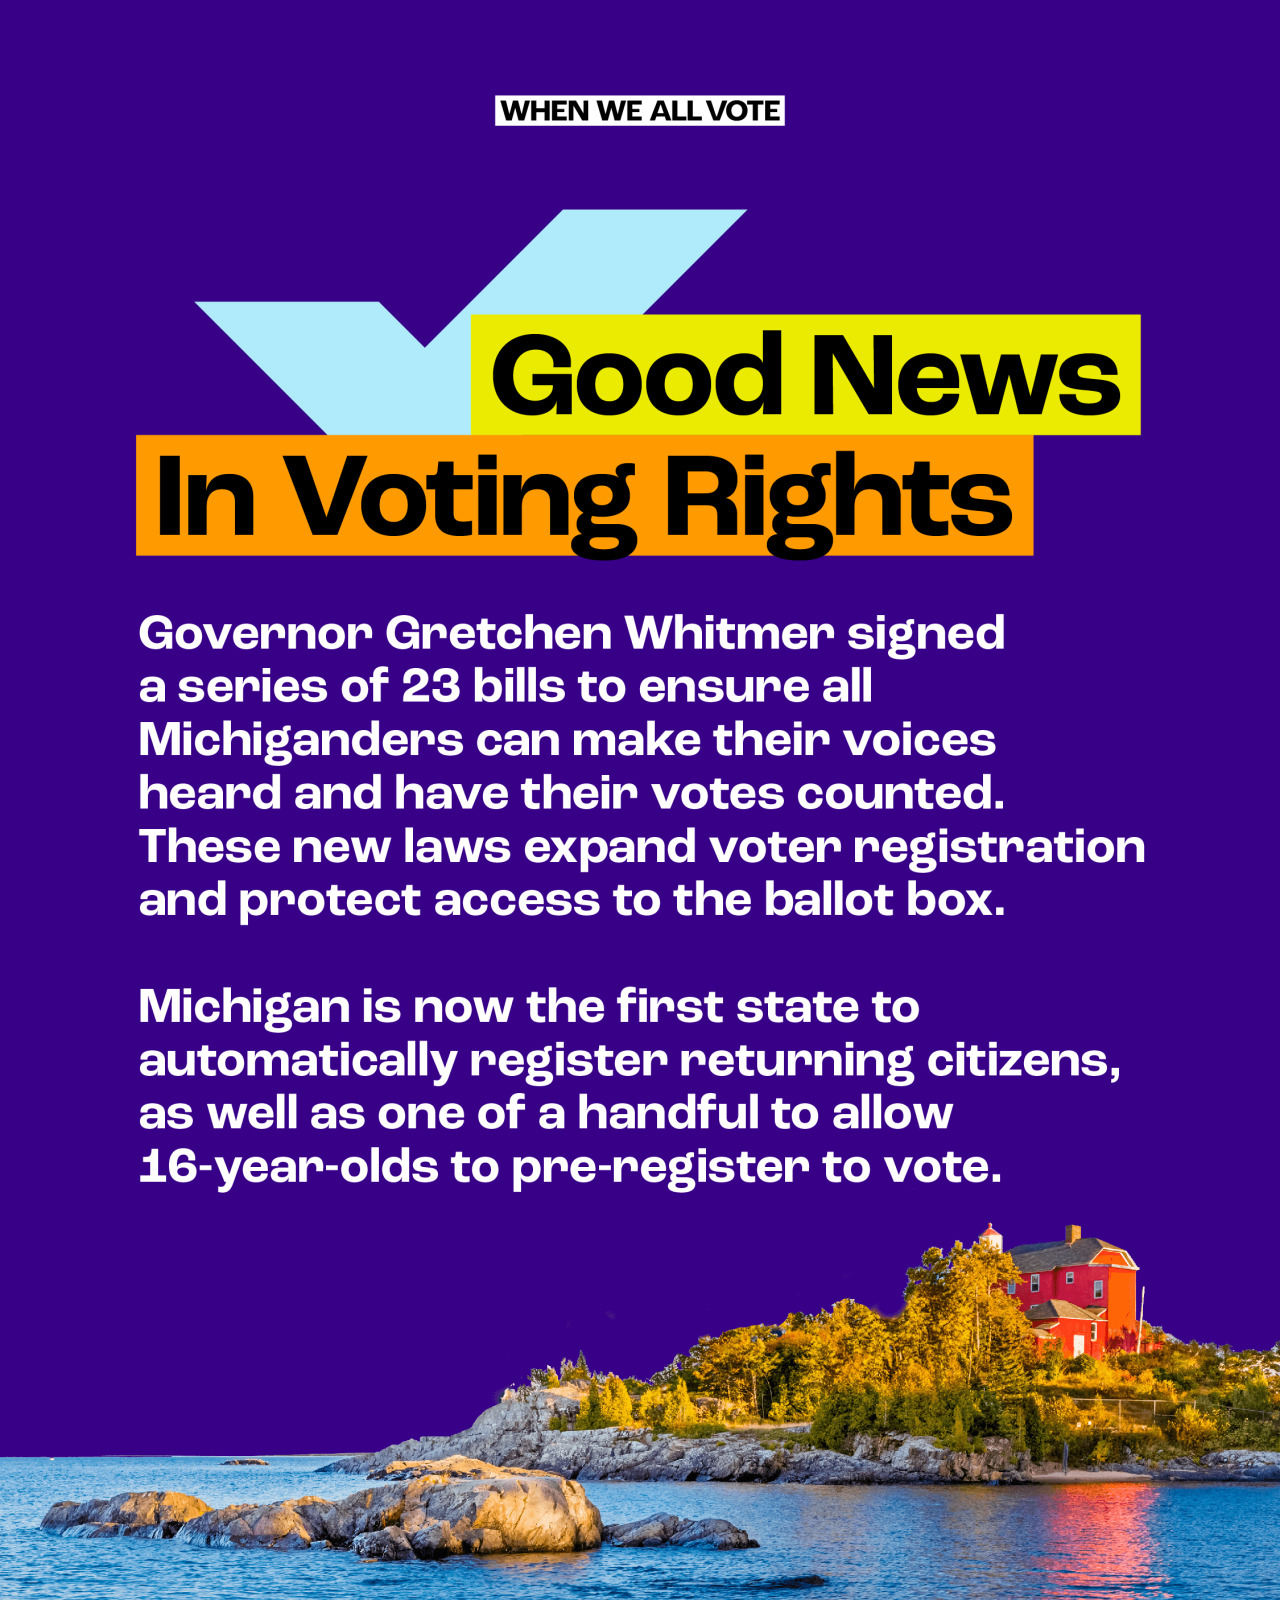 whenweallvote:
“Today is a great day for democracy in Michigan! 🎉 Gov. Gretchen Whitmer signed a series of election bills into law expanding and protecting access to the ballot box.These new laws:
🗳 Allow 16 year olds to pre-register to vote
🙌 Expand...